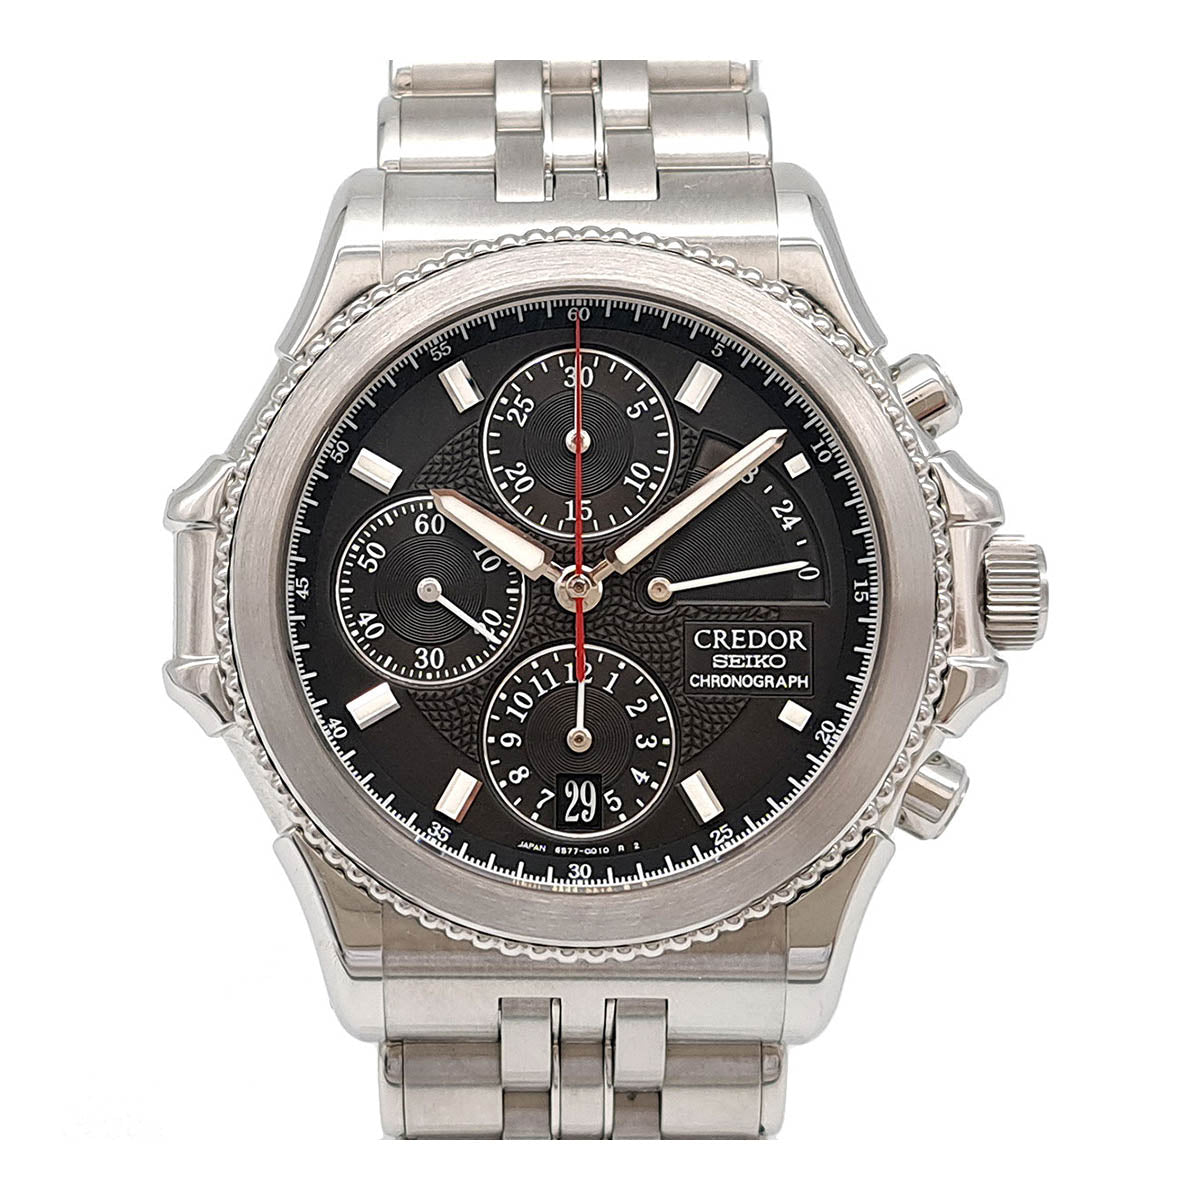 SEIKO Credor Pacific Chronograph 2000 Commemorative GCBK999 Automatic Stainless Steel Men's Watch (Pre-Owned) GCBK999